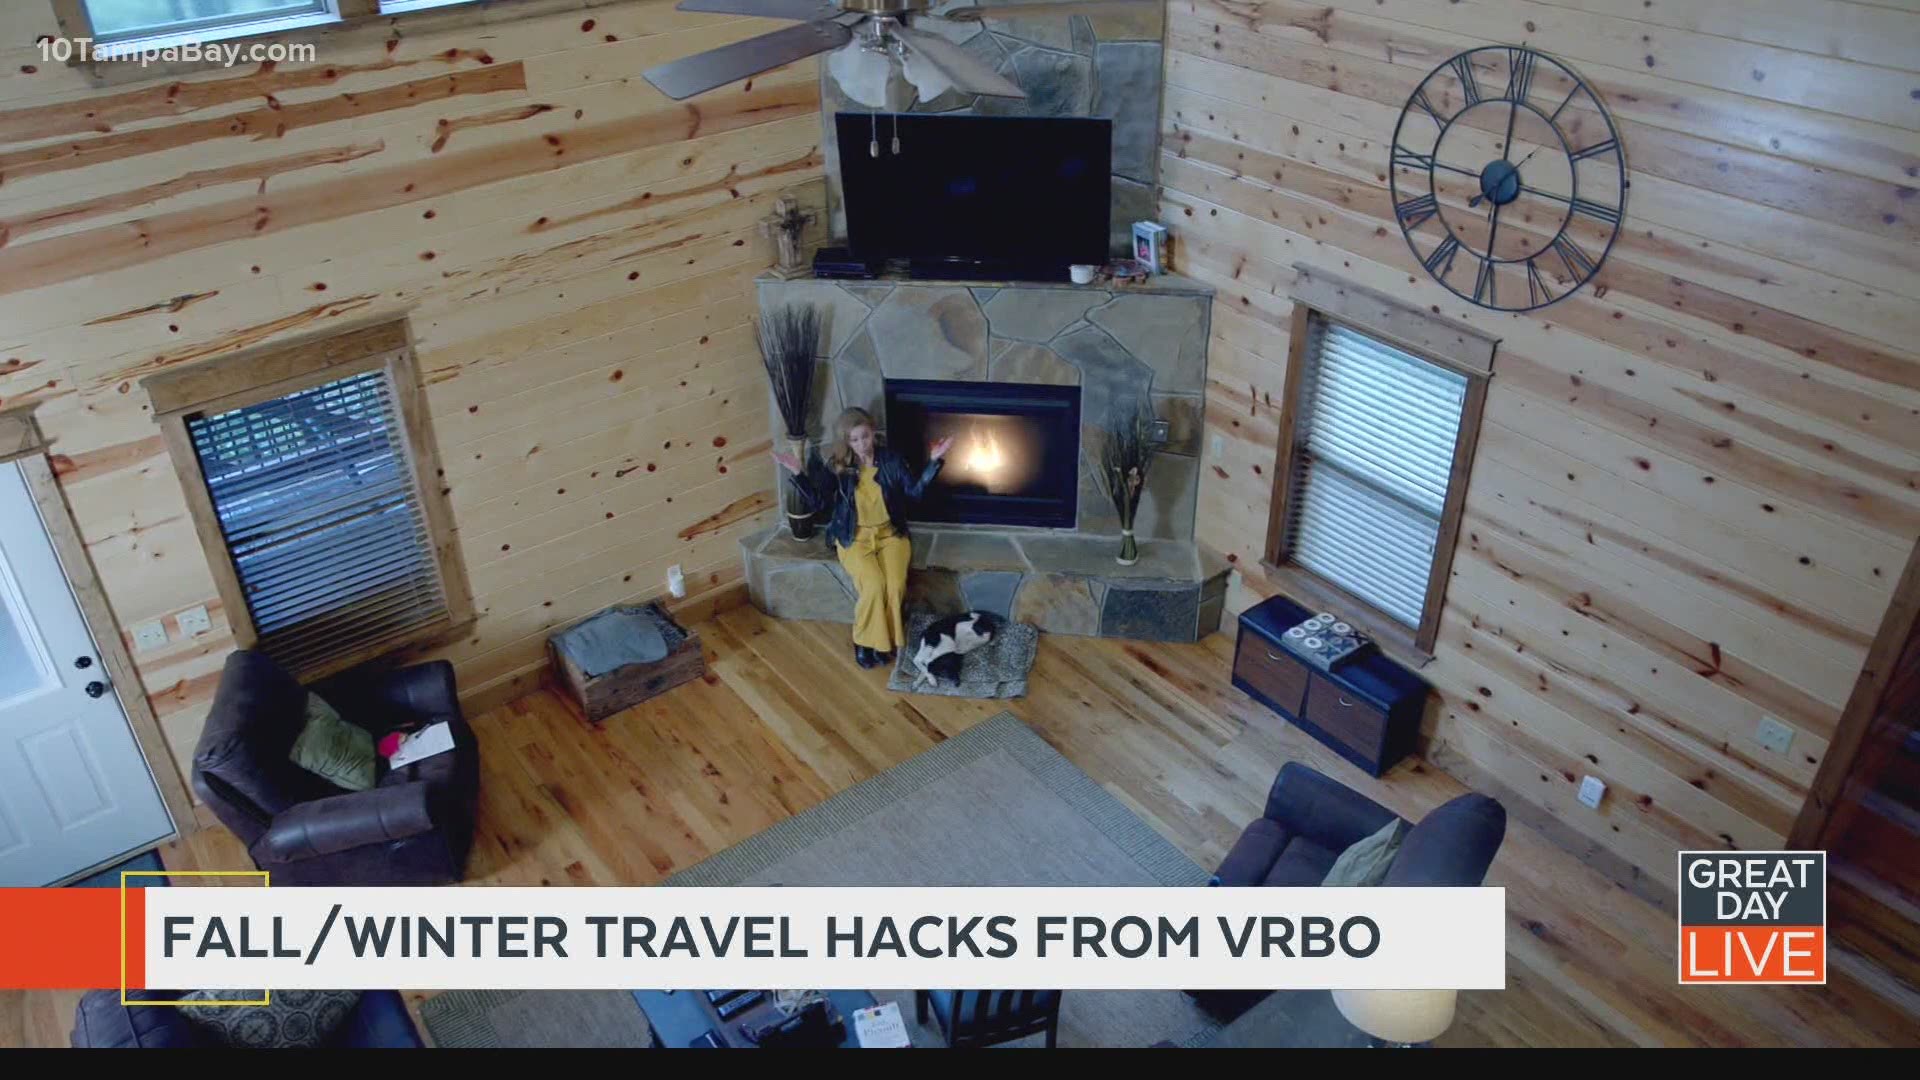 Paid content sponsored by Vrbo